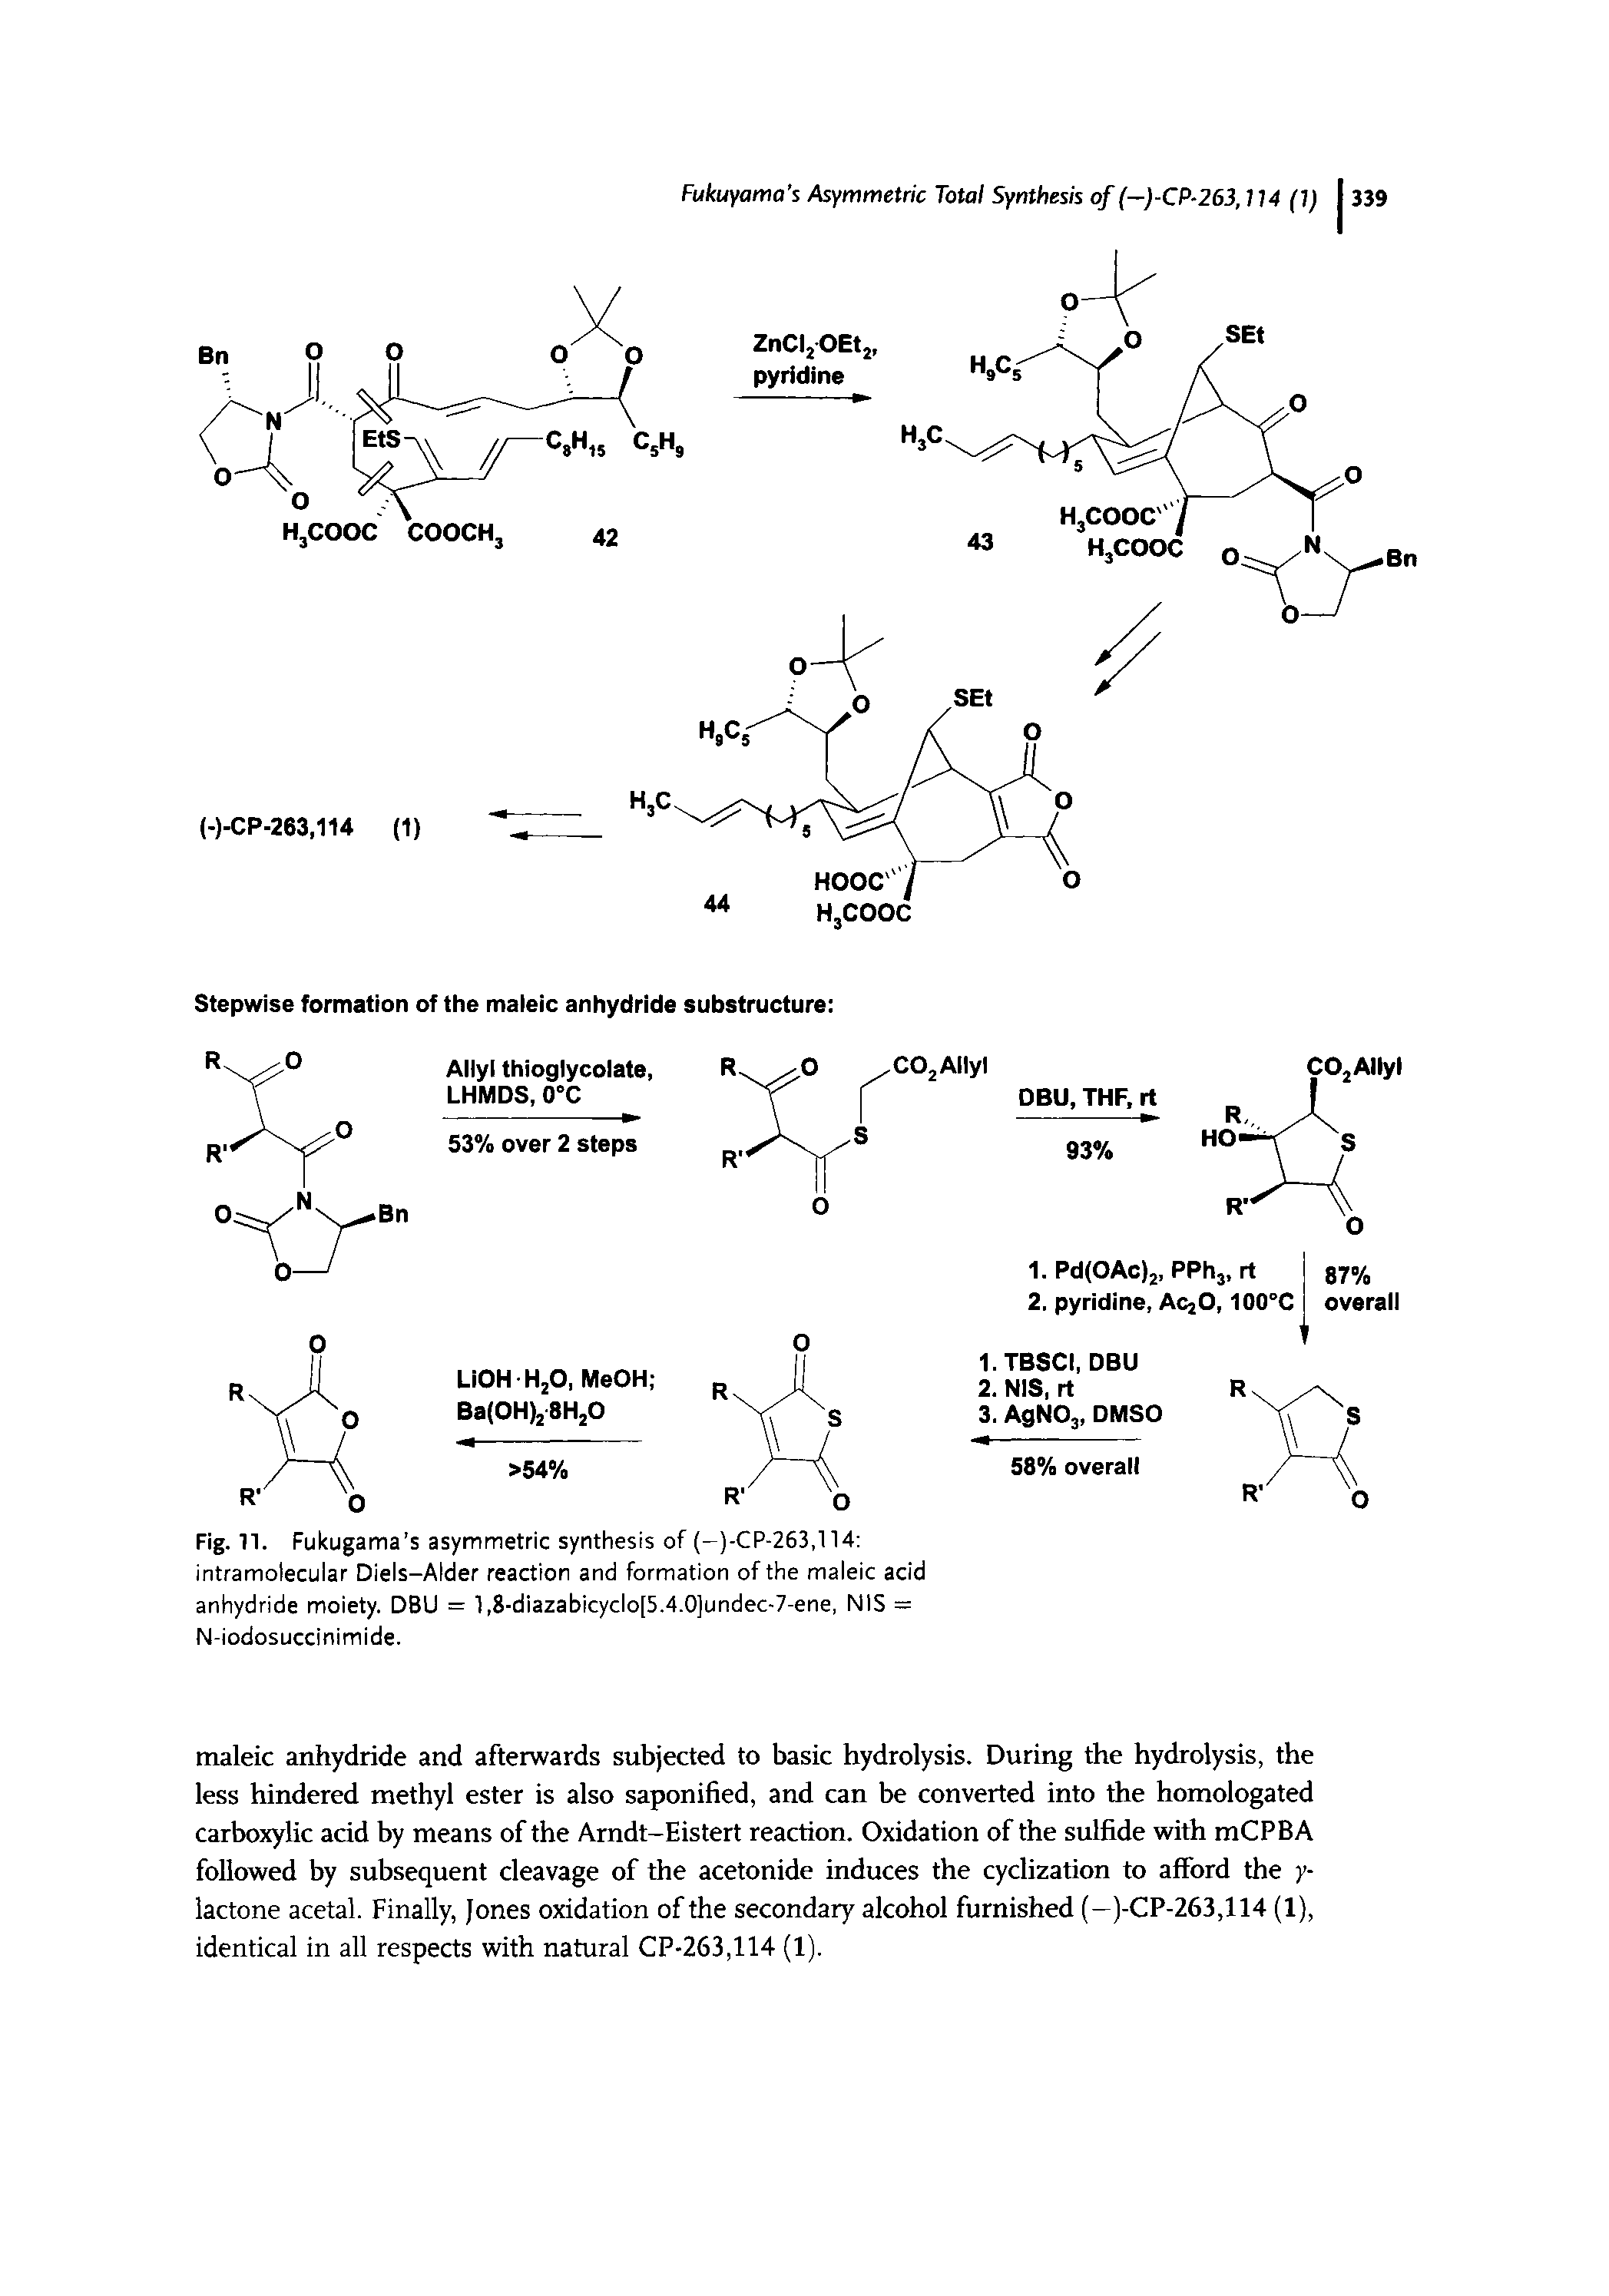 Fig. 11. Fukugama s asymmetric synthesis of (-(-CP-263,114 intramolecular Diels—Alder reaction and formation of the maleic acid anhydride moiety. DBU = l,8-diazabicyclo[5.4.0]undec-7-ene, NIS = N-iodosuccinimide.